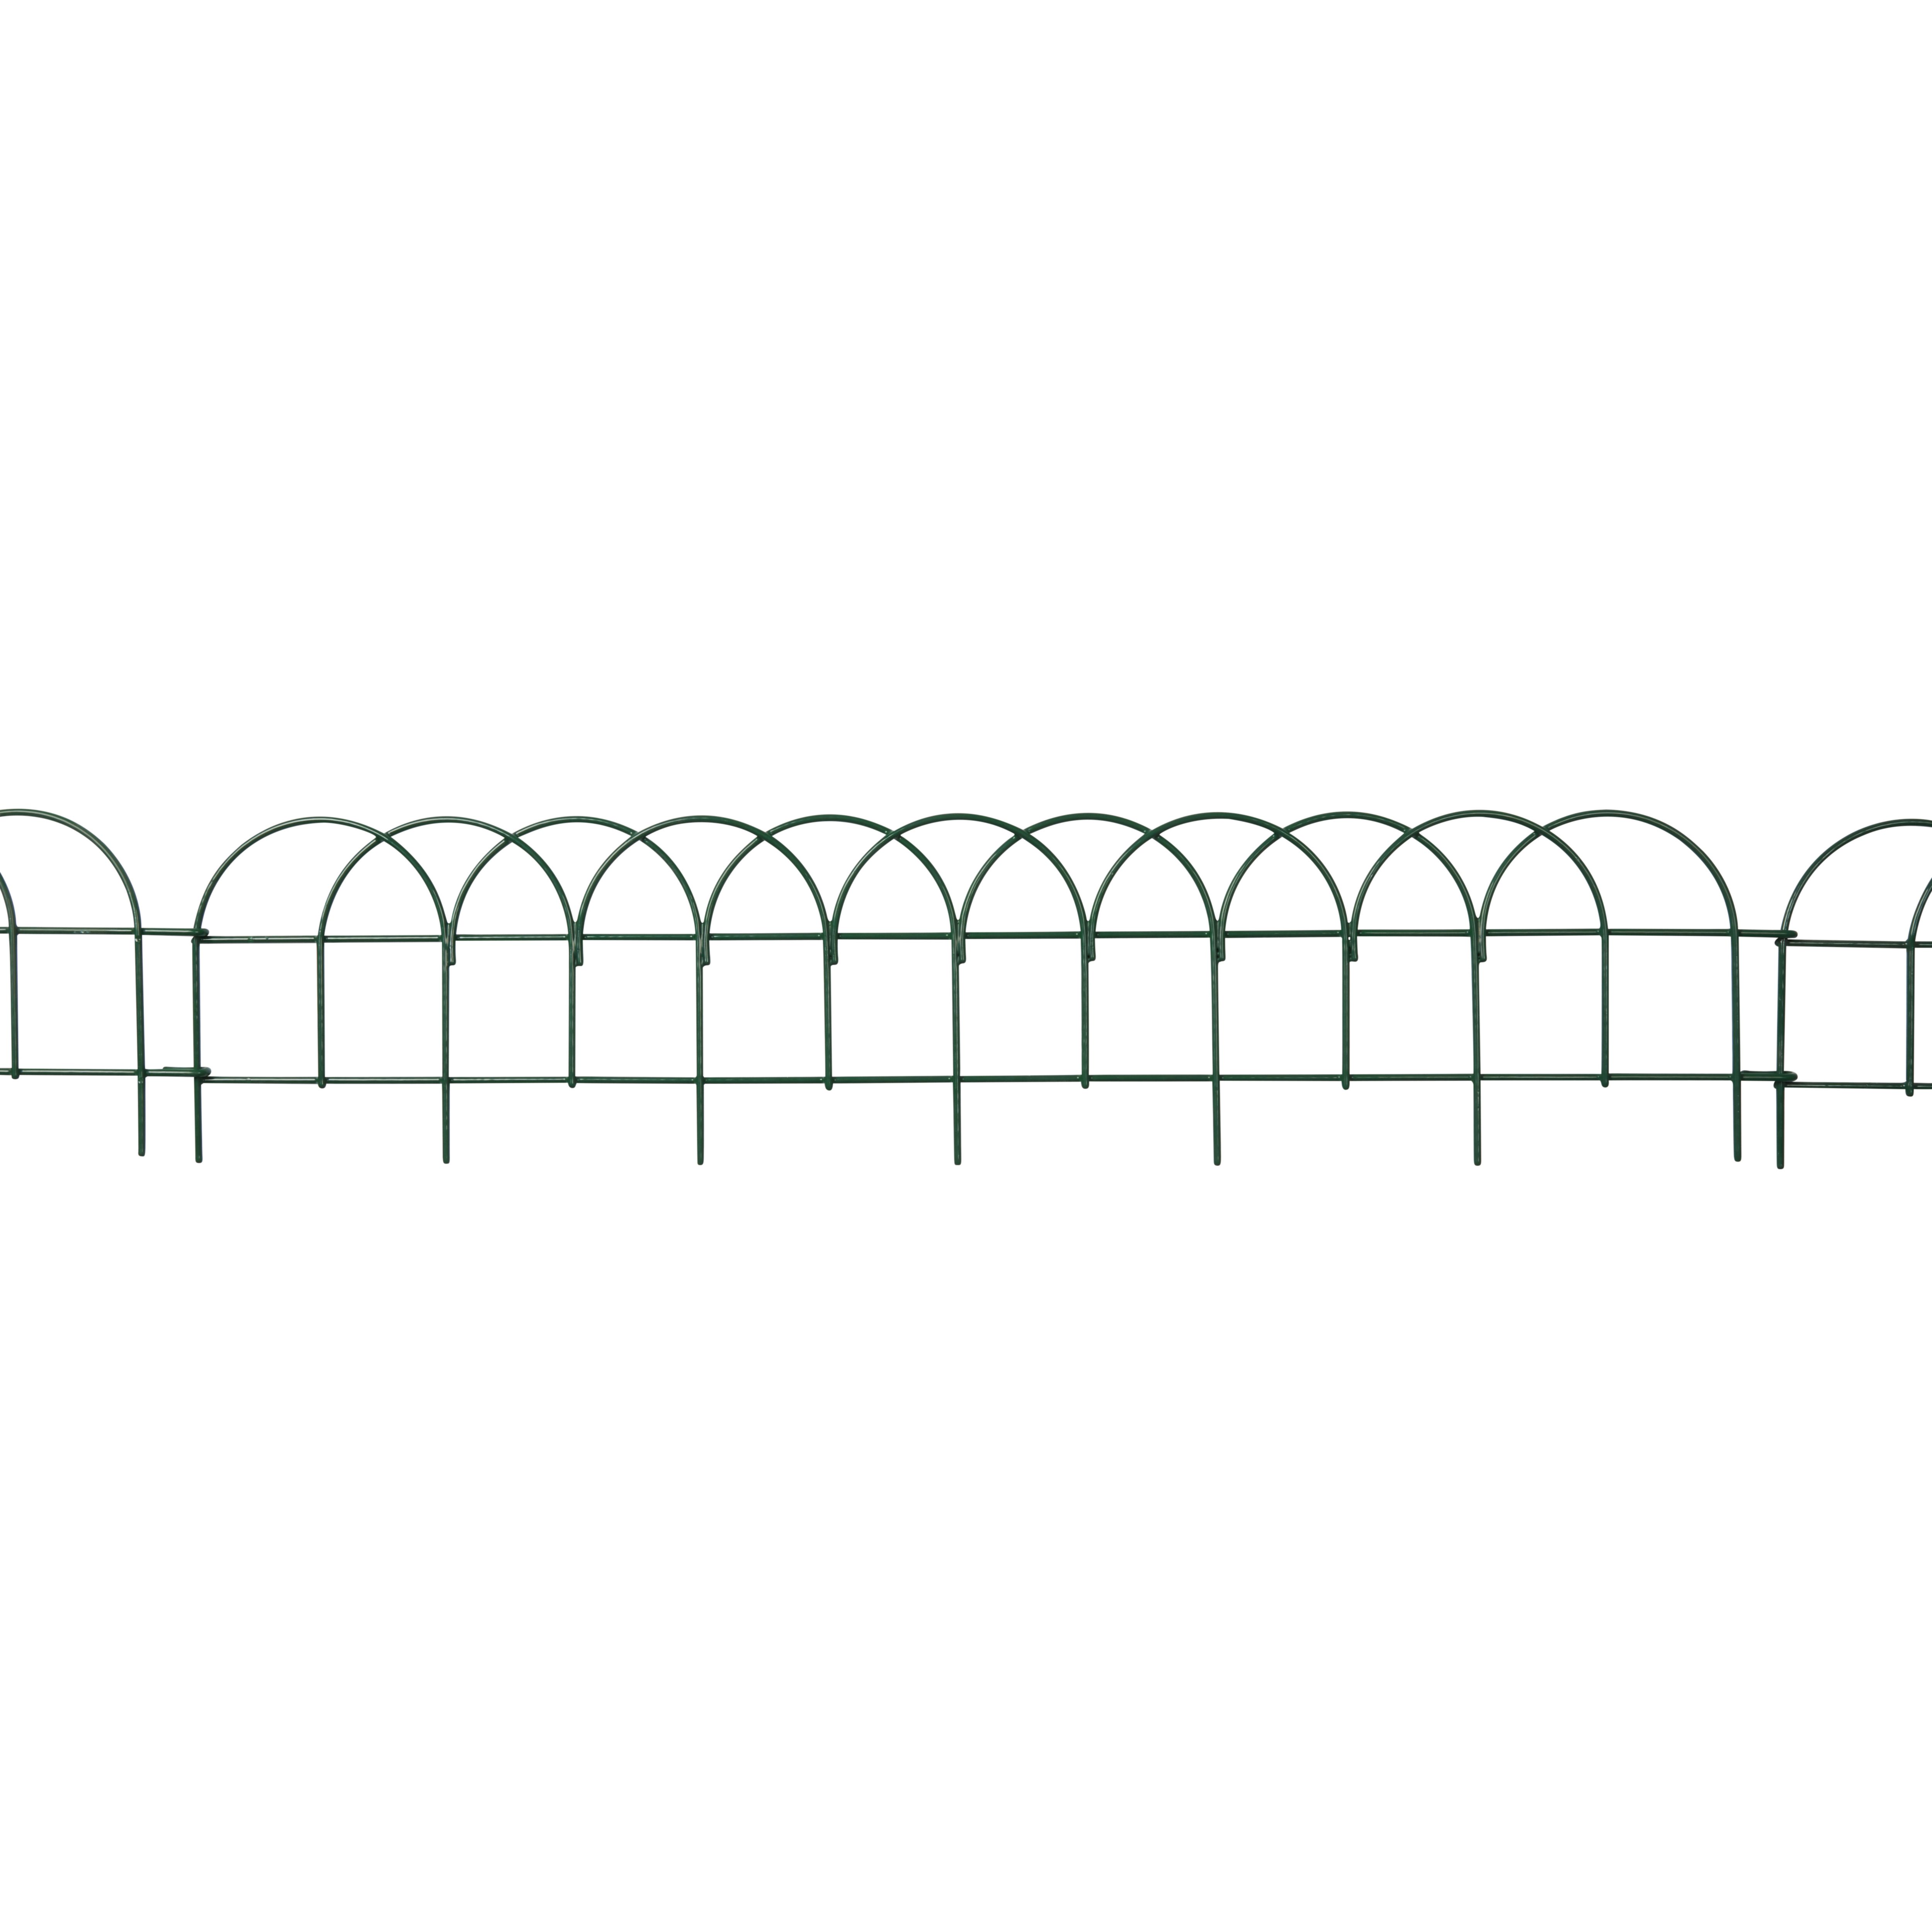 Lawn Edging B&Q - Rope Top Paving Edging Cotswold, (L)600mm (H)150mm (T)50mm ... - One 6 x 3 panel from b&m costs £17.99.